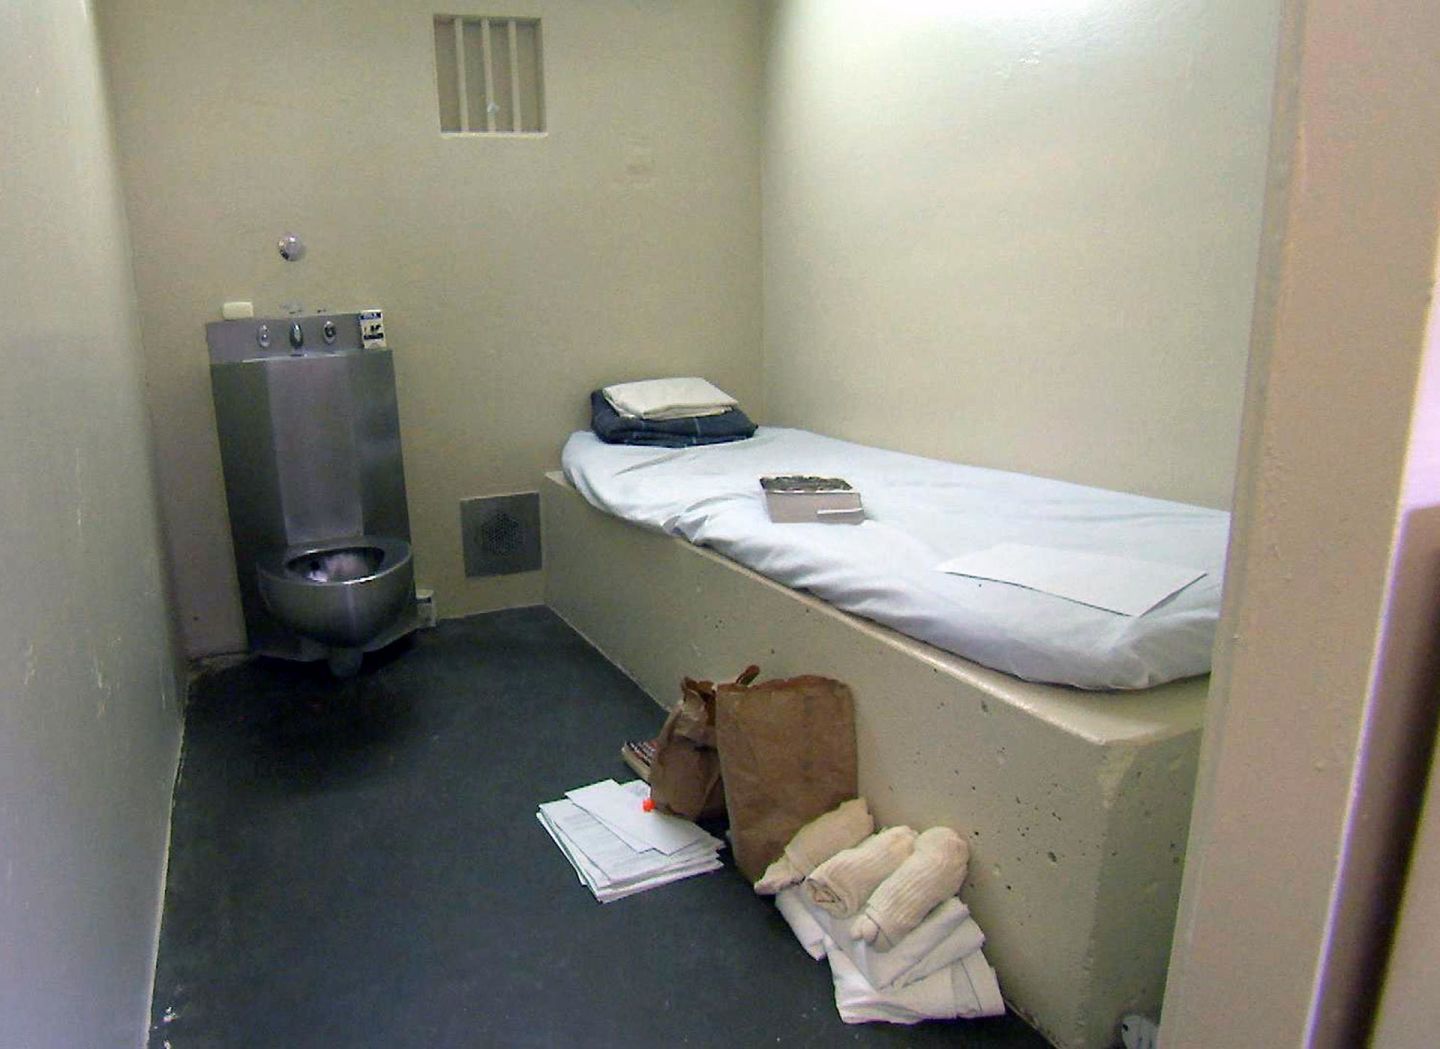 A concrete block and a thin mattress make up the bed for some cells on death row. The toilet is metal, there is no rug, just a concrete floor.